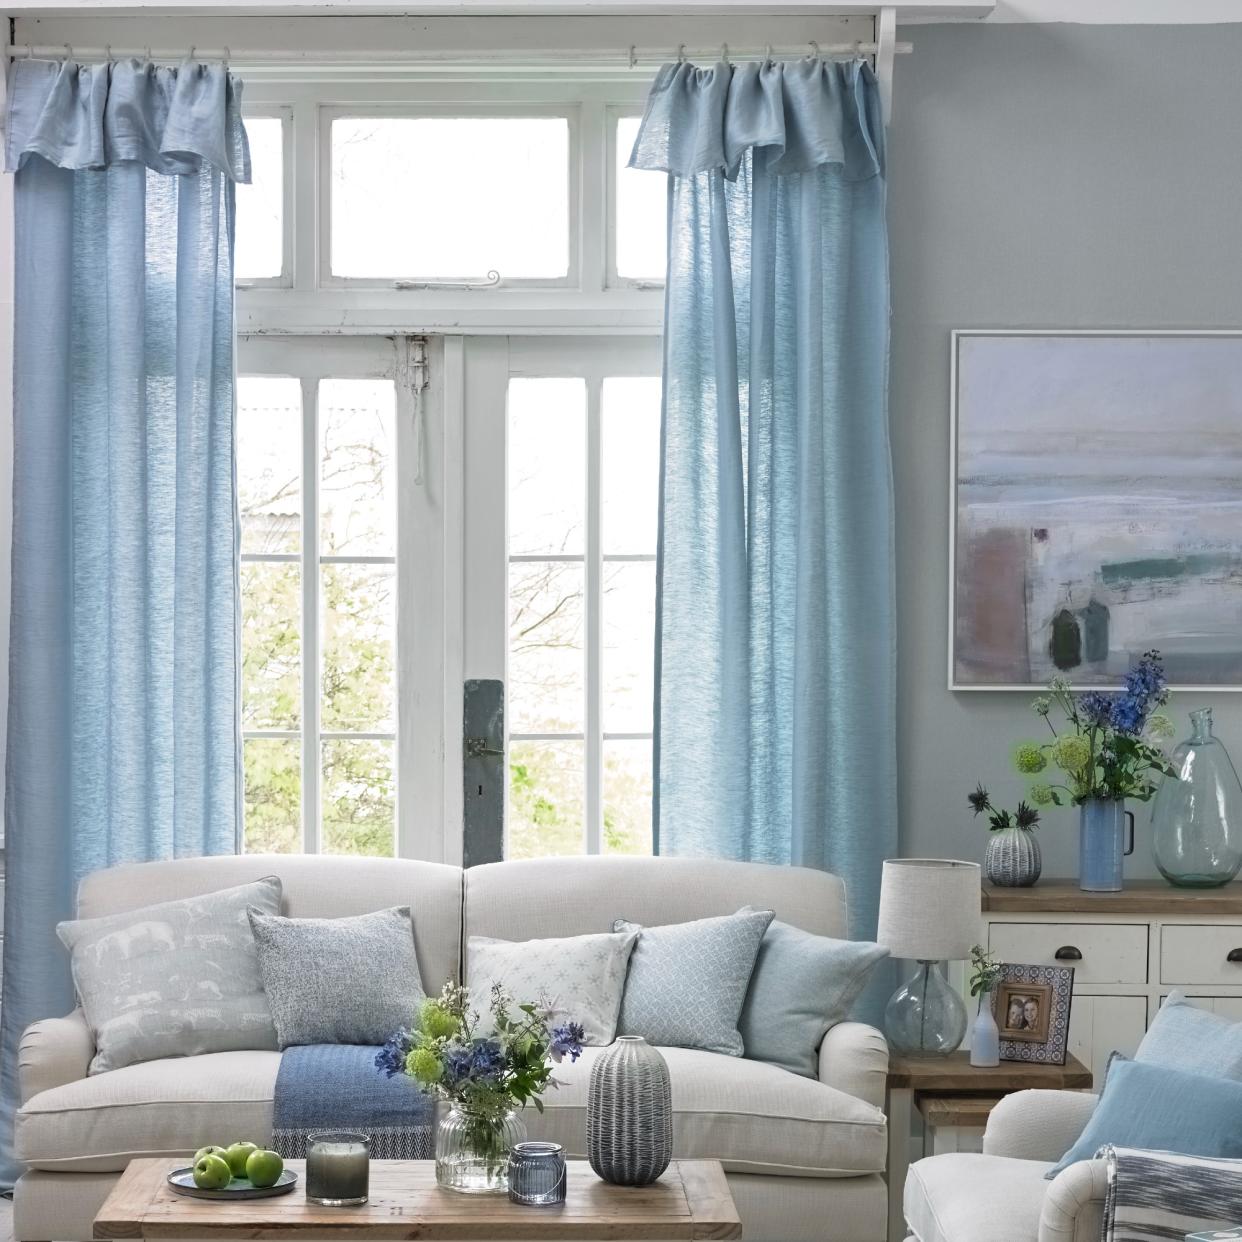  A living room with high ceilings and window covered by long blue curtains. 